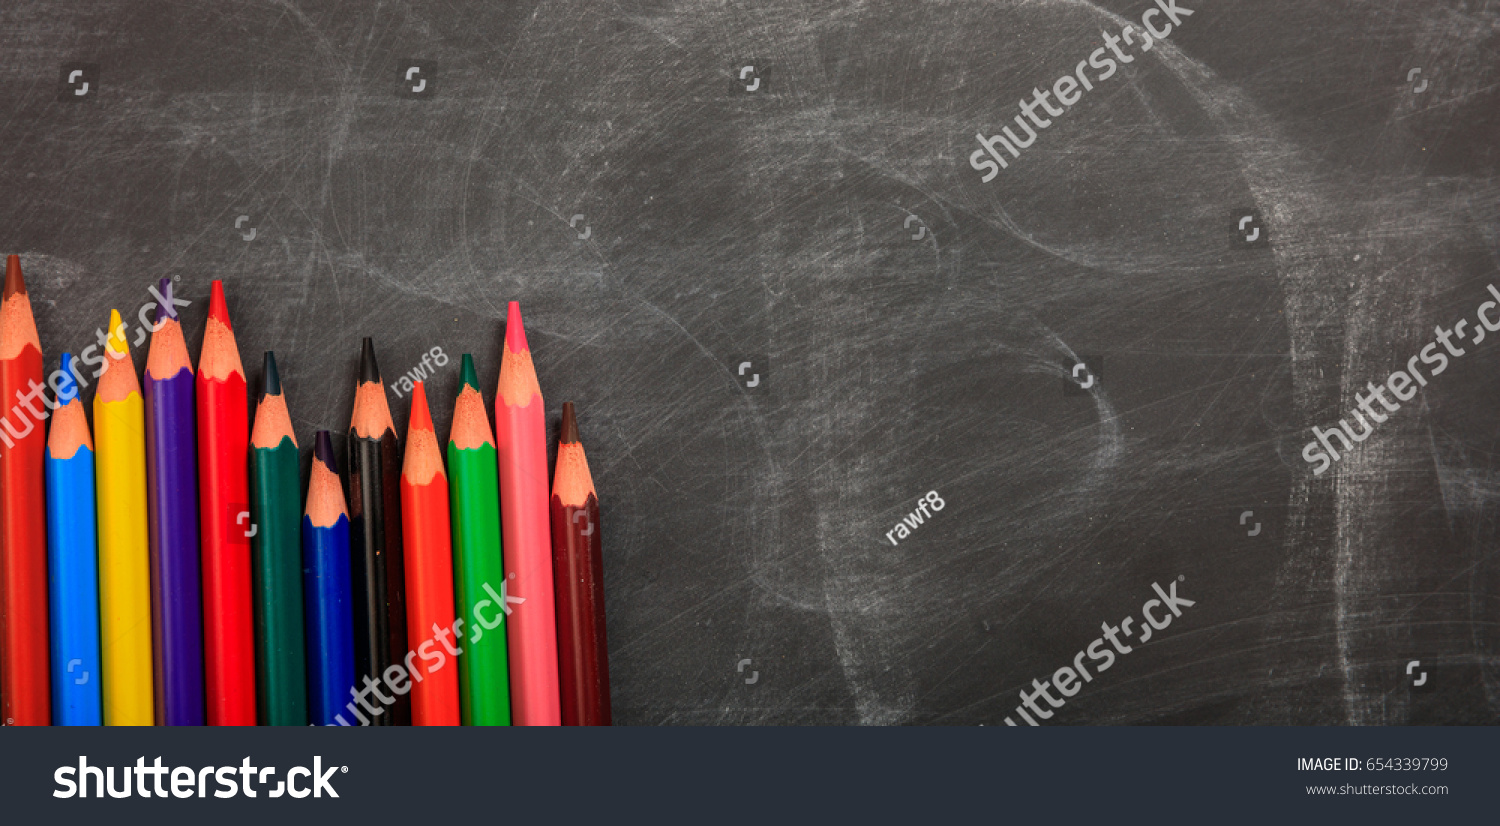 Colored pencils on a black chalkboard - space for caption #654339799